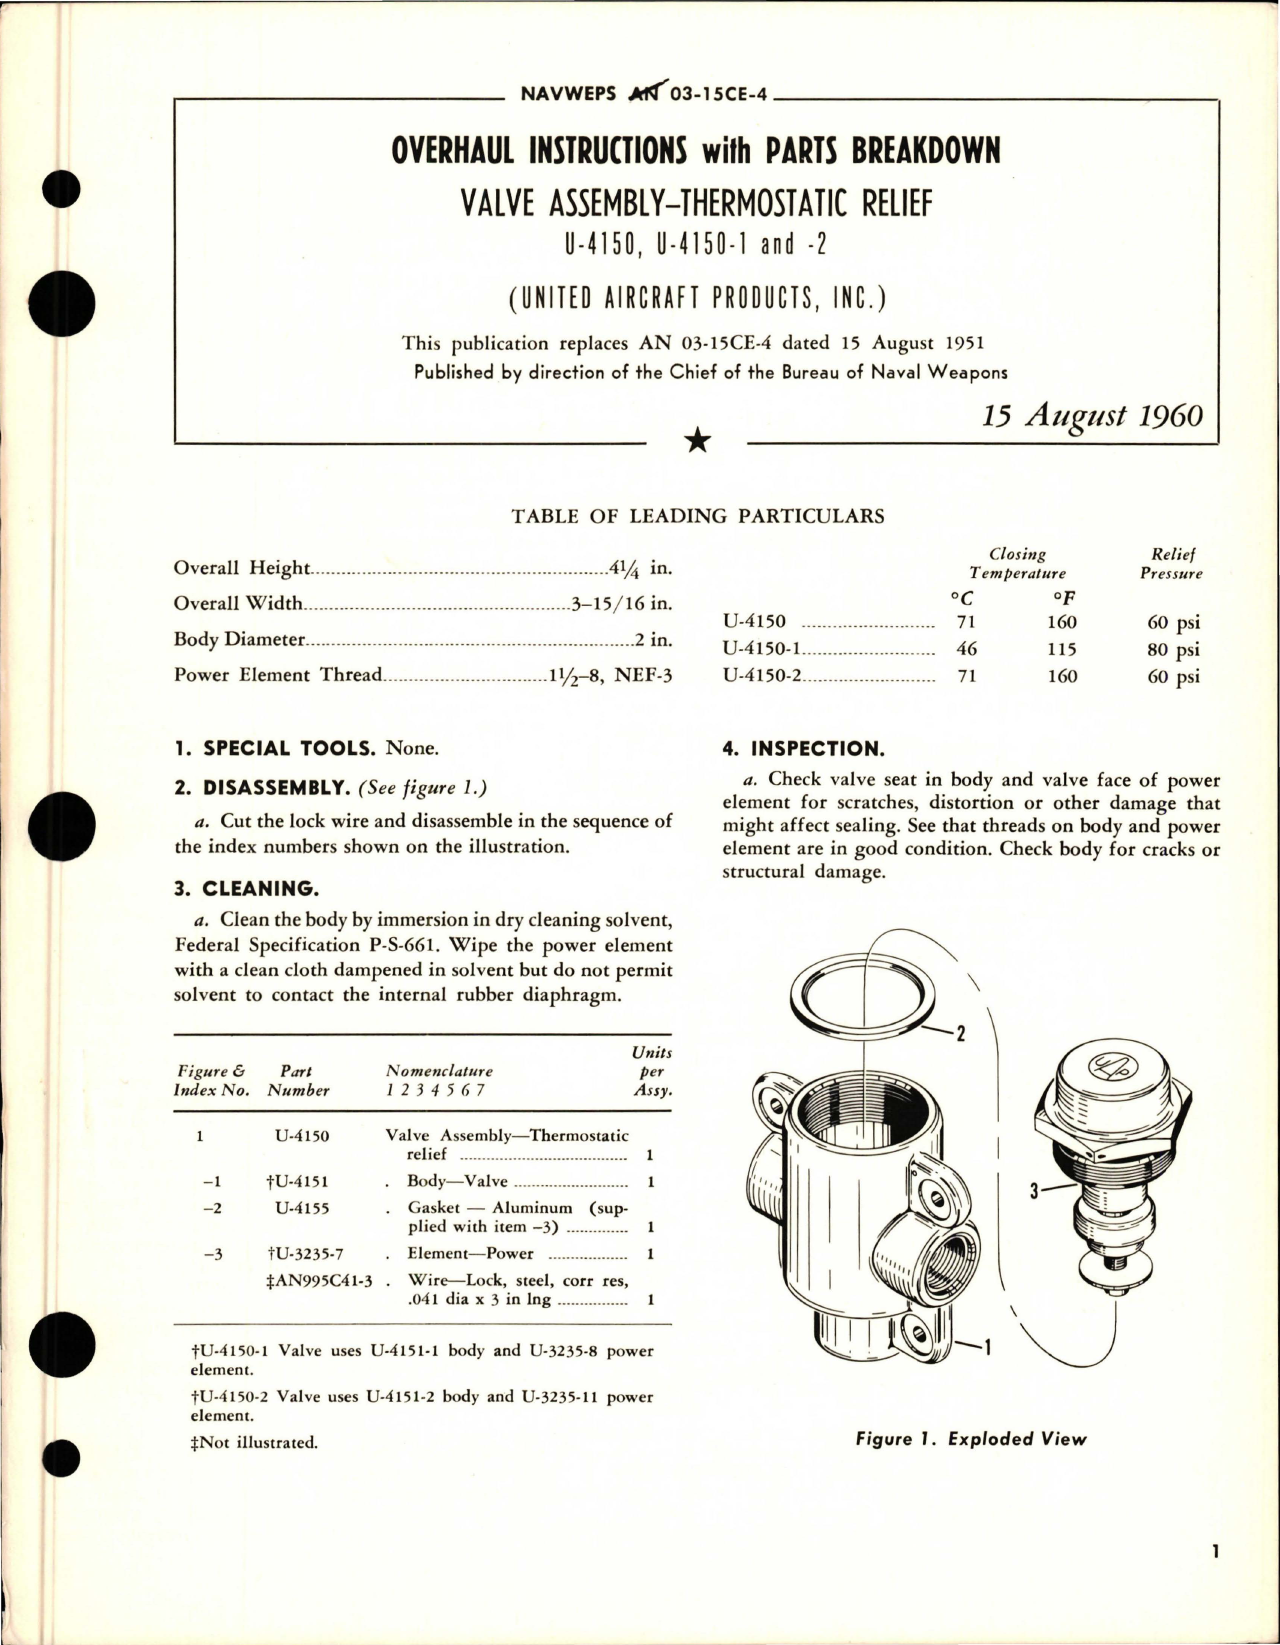 Sample page 1 from AirCorps Library document: Overhaul Instructions with Parts for Thermostatic Relief Valve Assembly - U-4150, U-4150-1, and U-4150-2